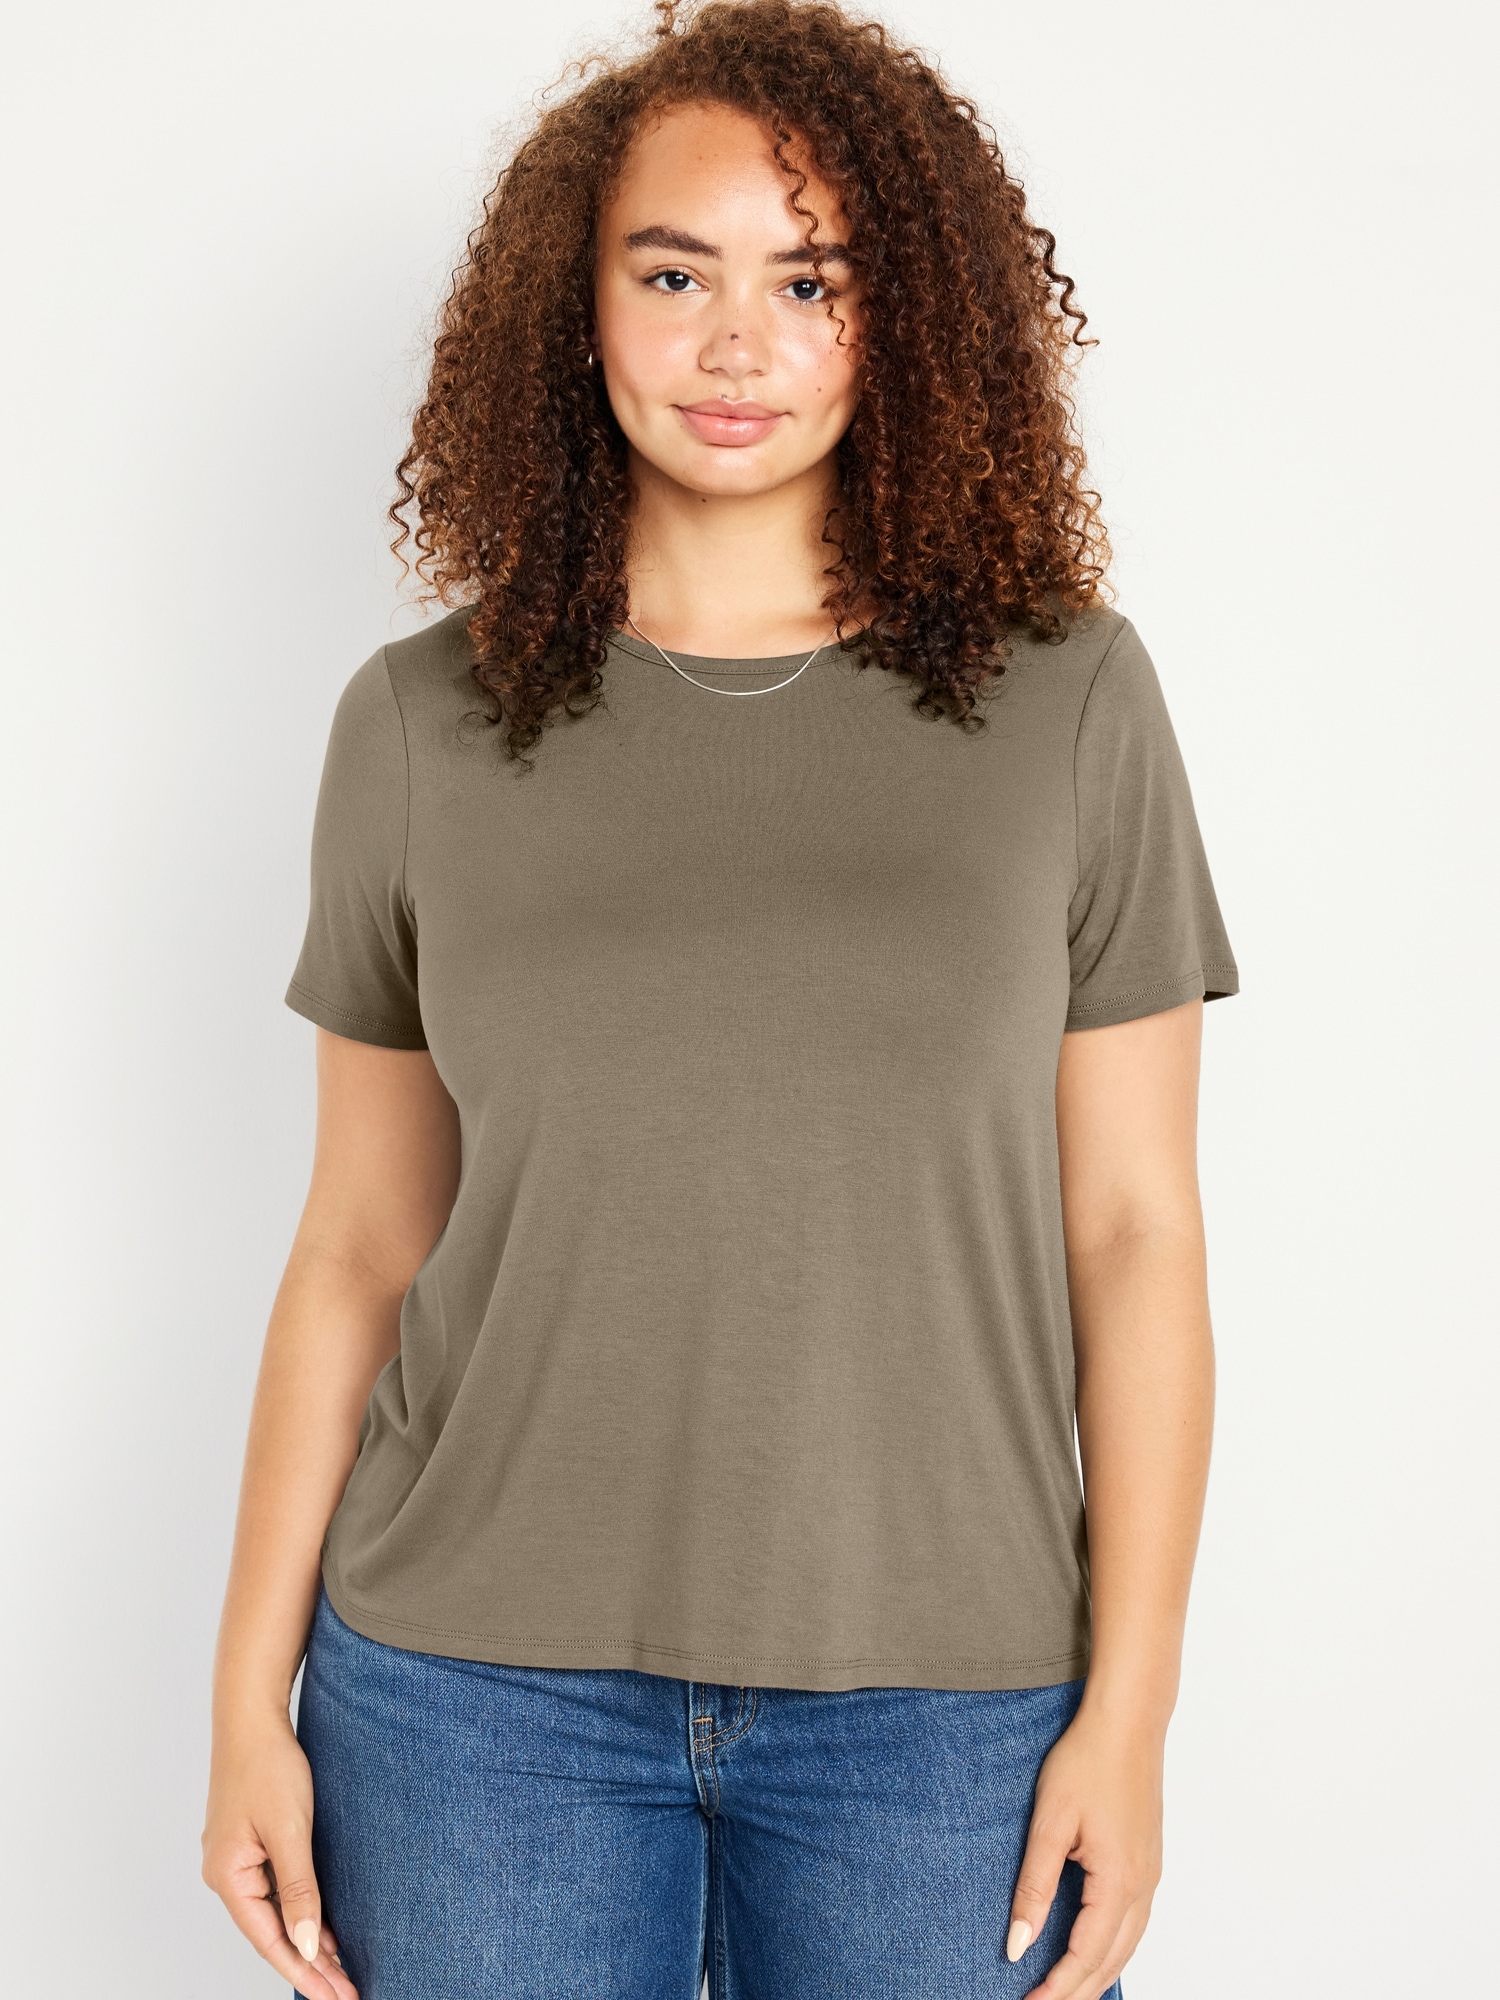 Luxe T-Shirt Old for Crew-Neck Women Navy |